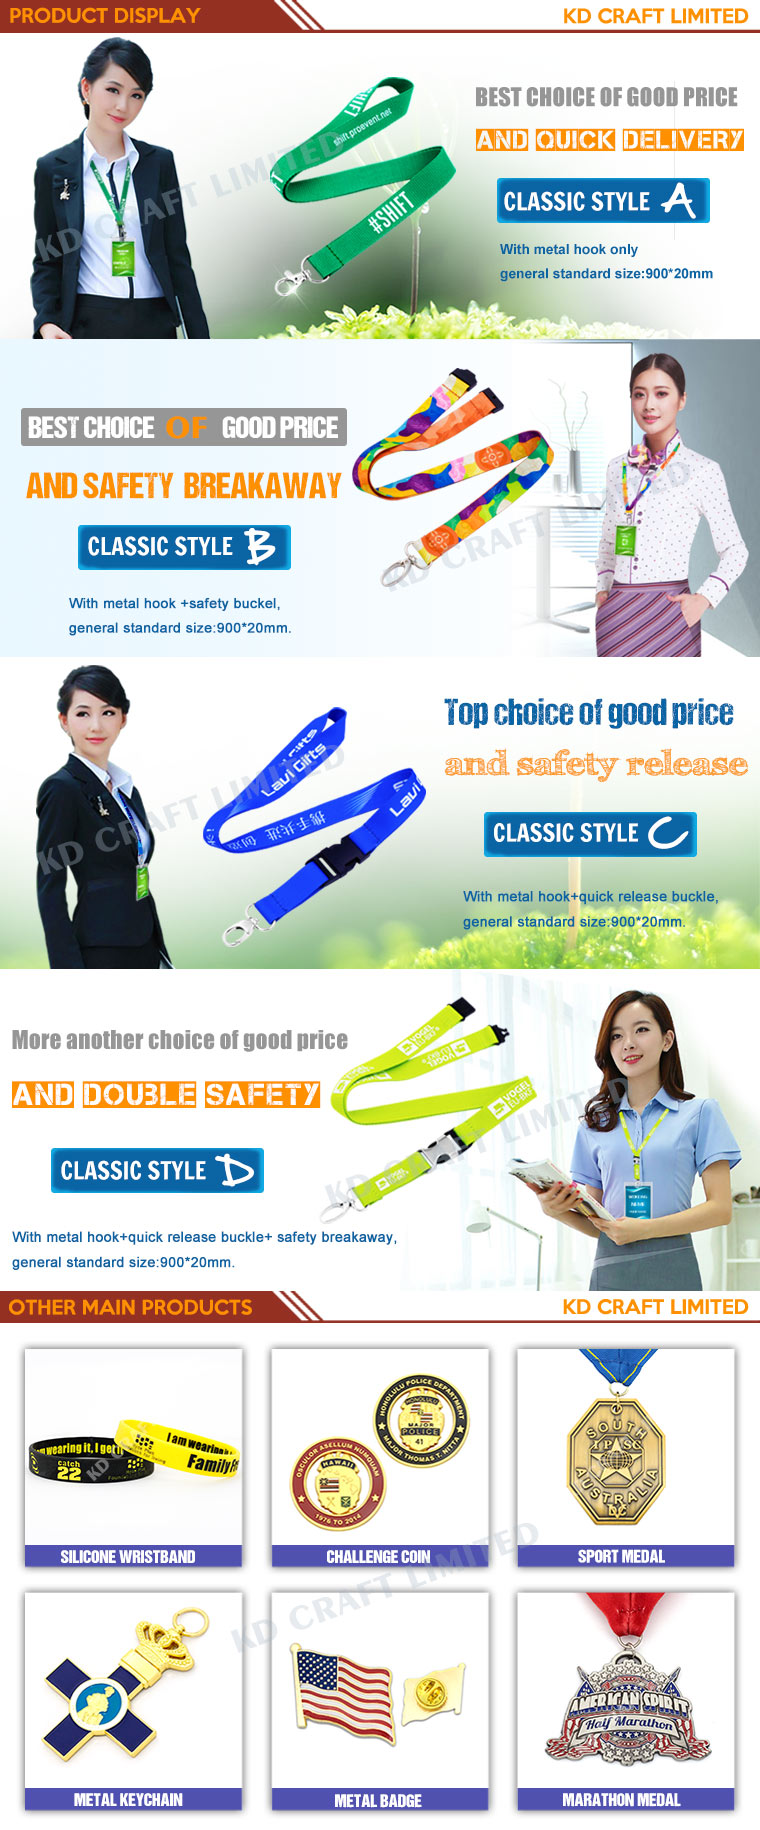 China Customized Logo High Quality Woven Lanyard at Factory Price as Gift